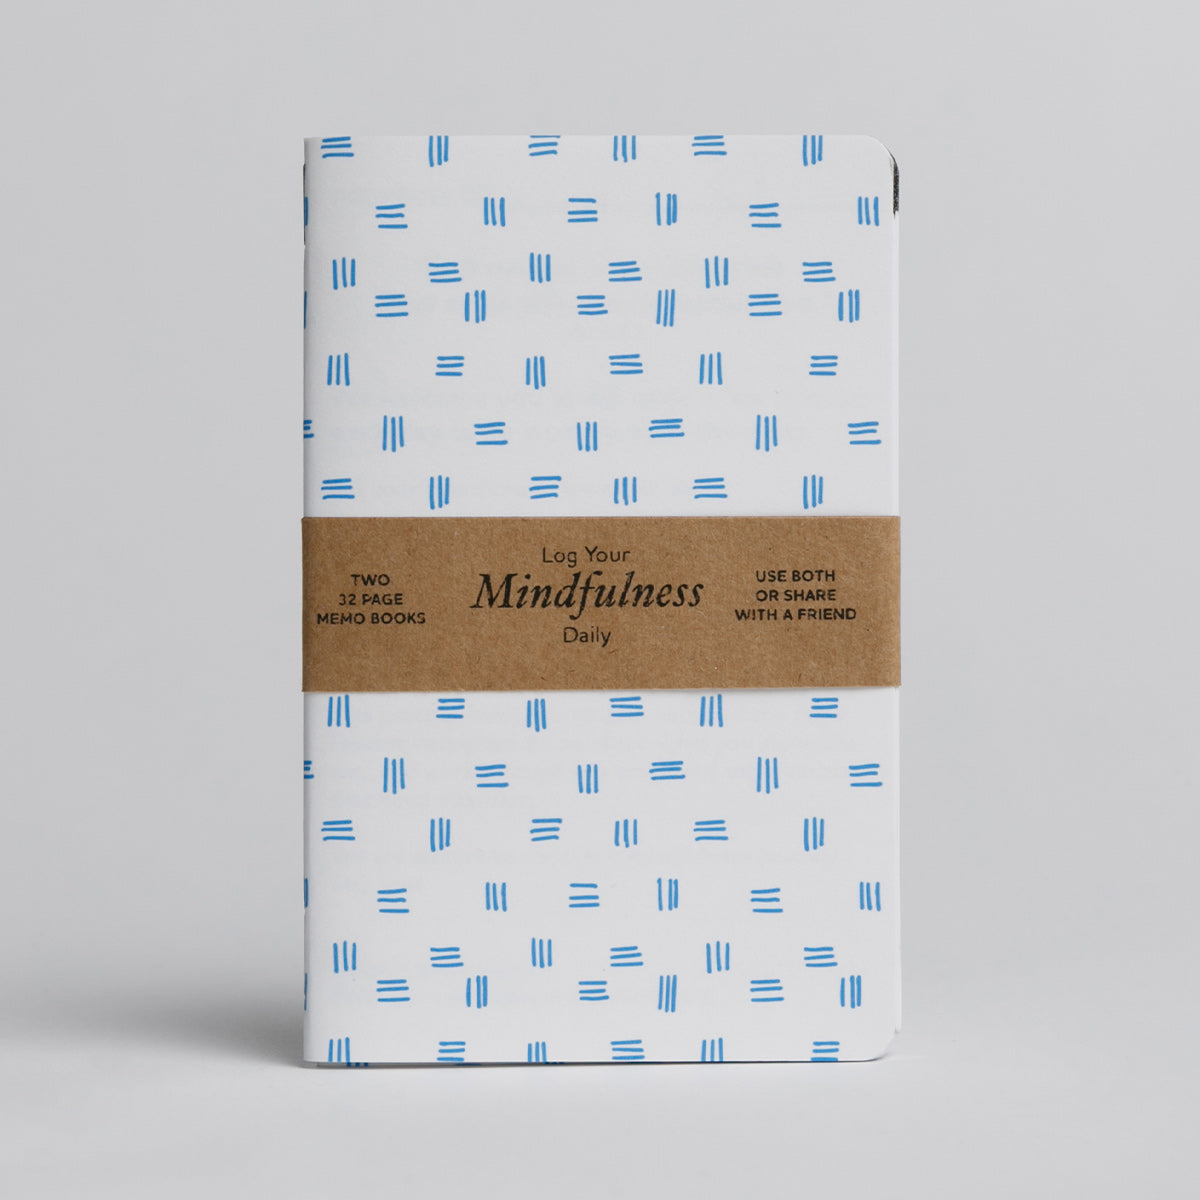 The Mindfulness Logbook - Two 32-page custom books